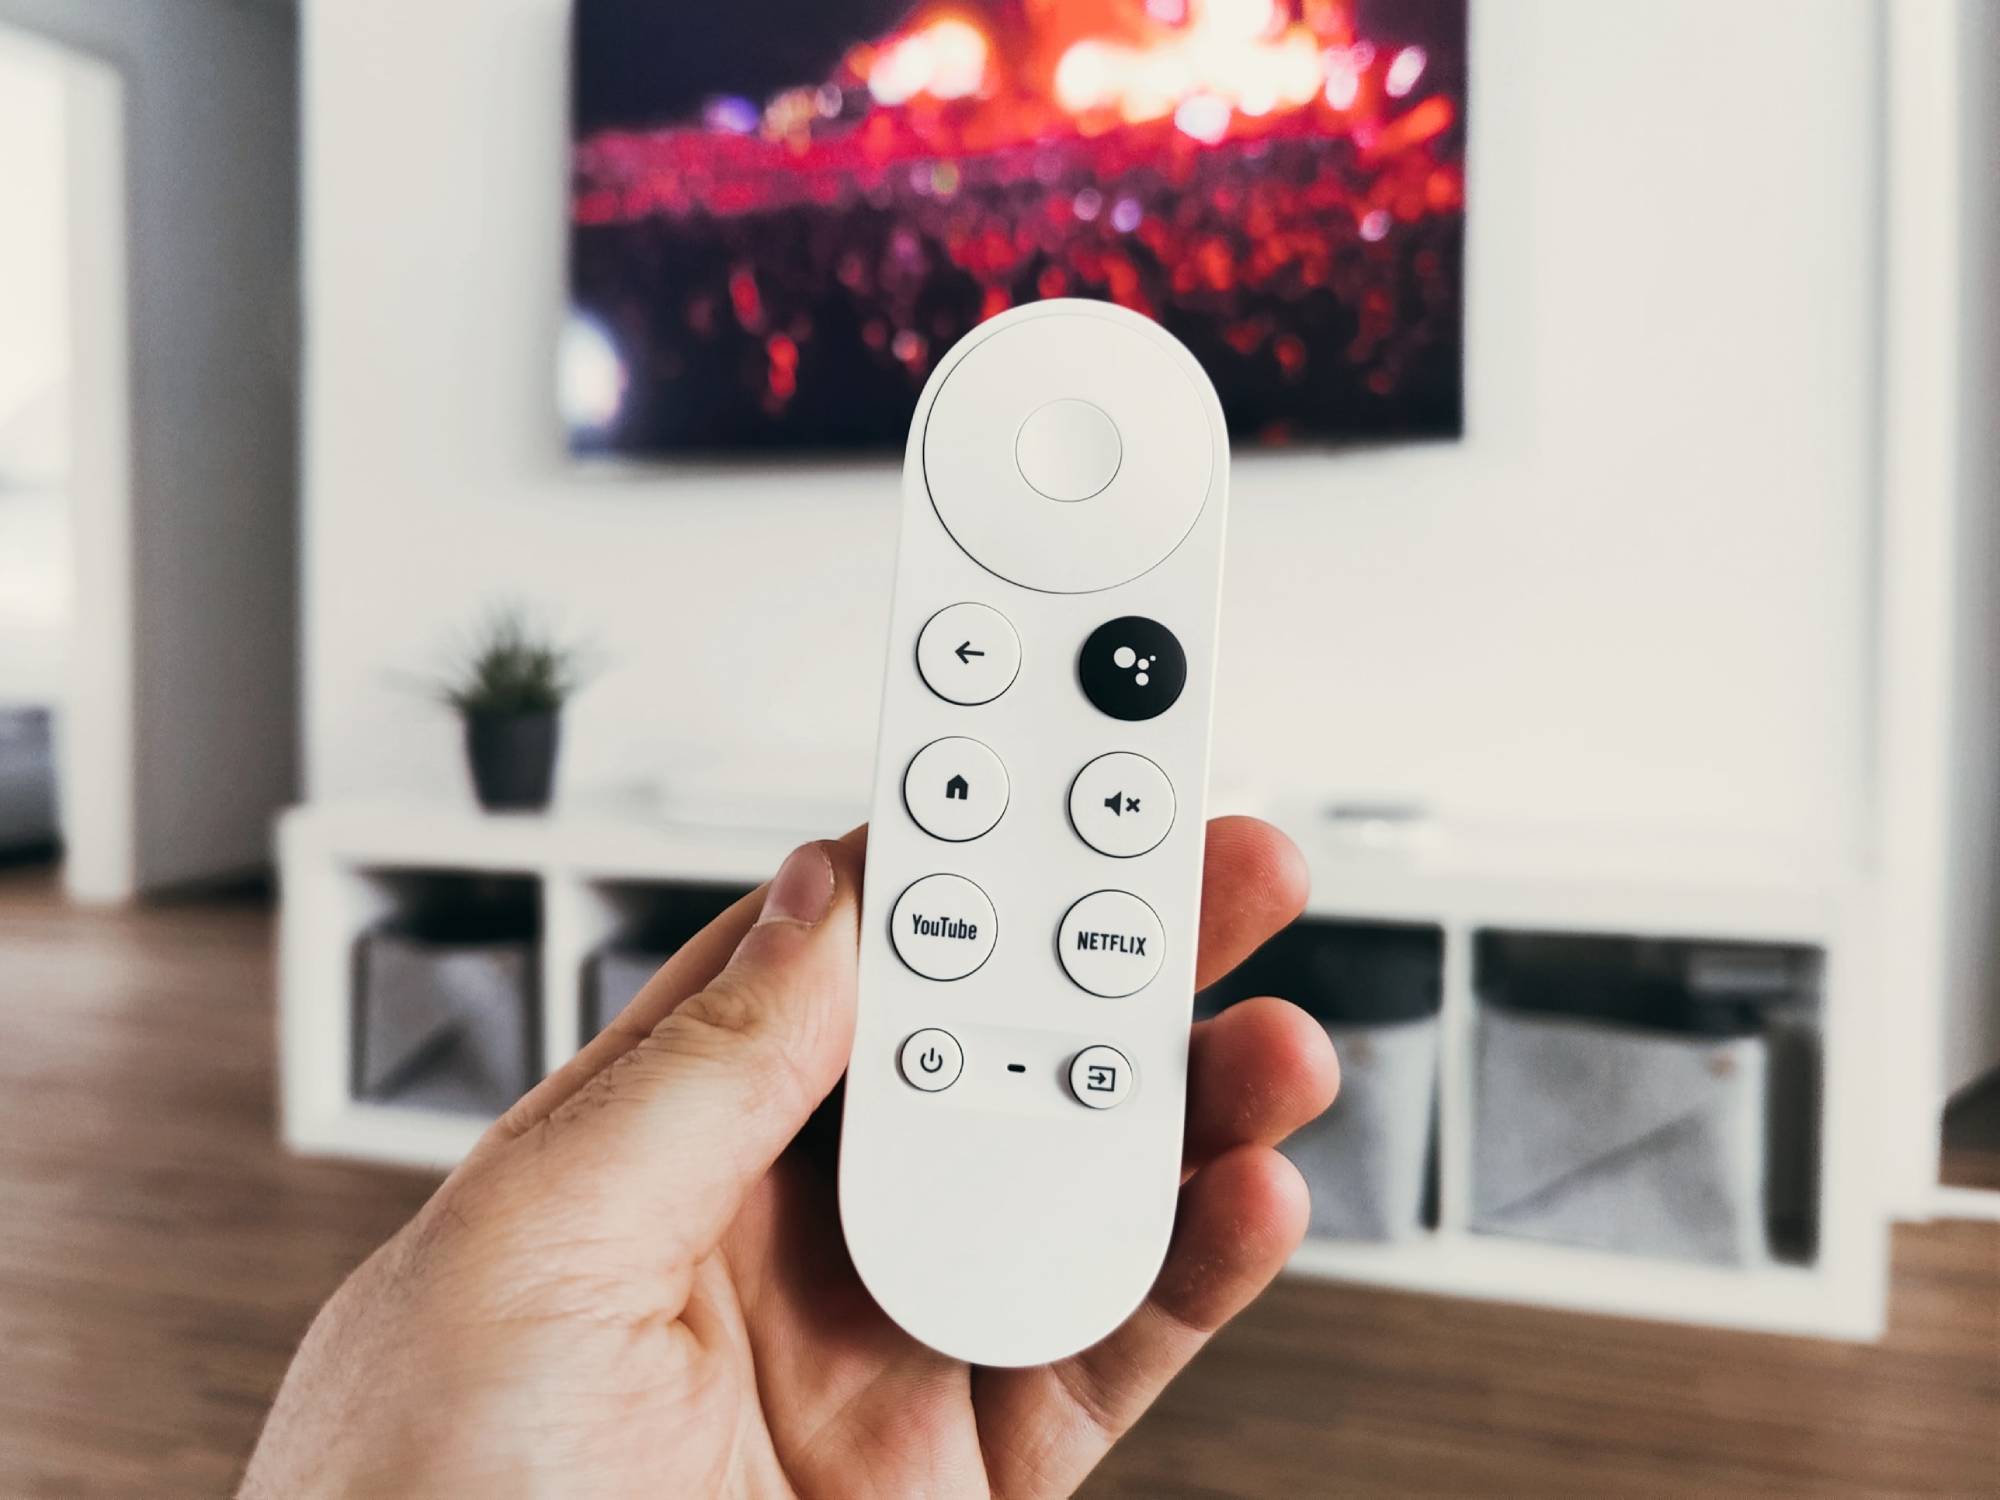 Remap the streaming service buttons on your Google TV remote